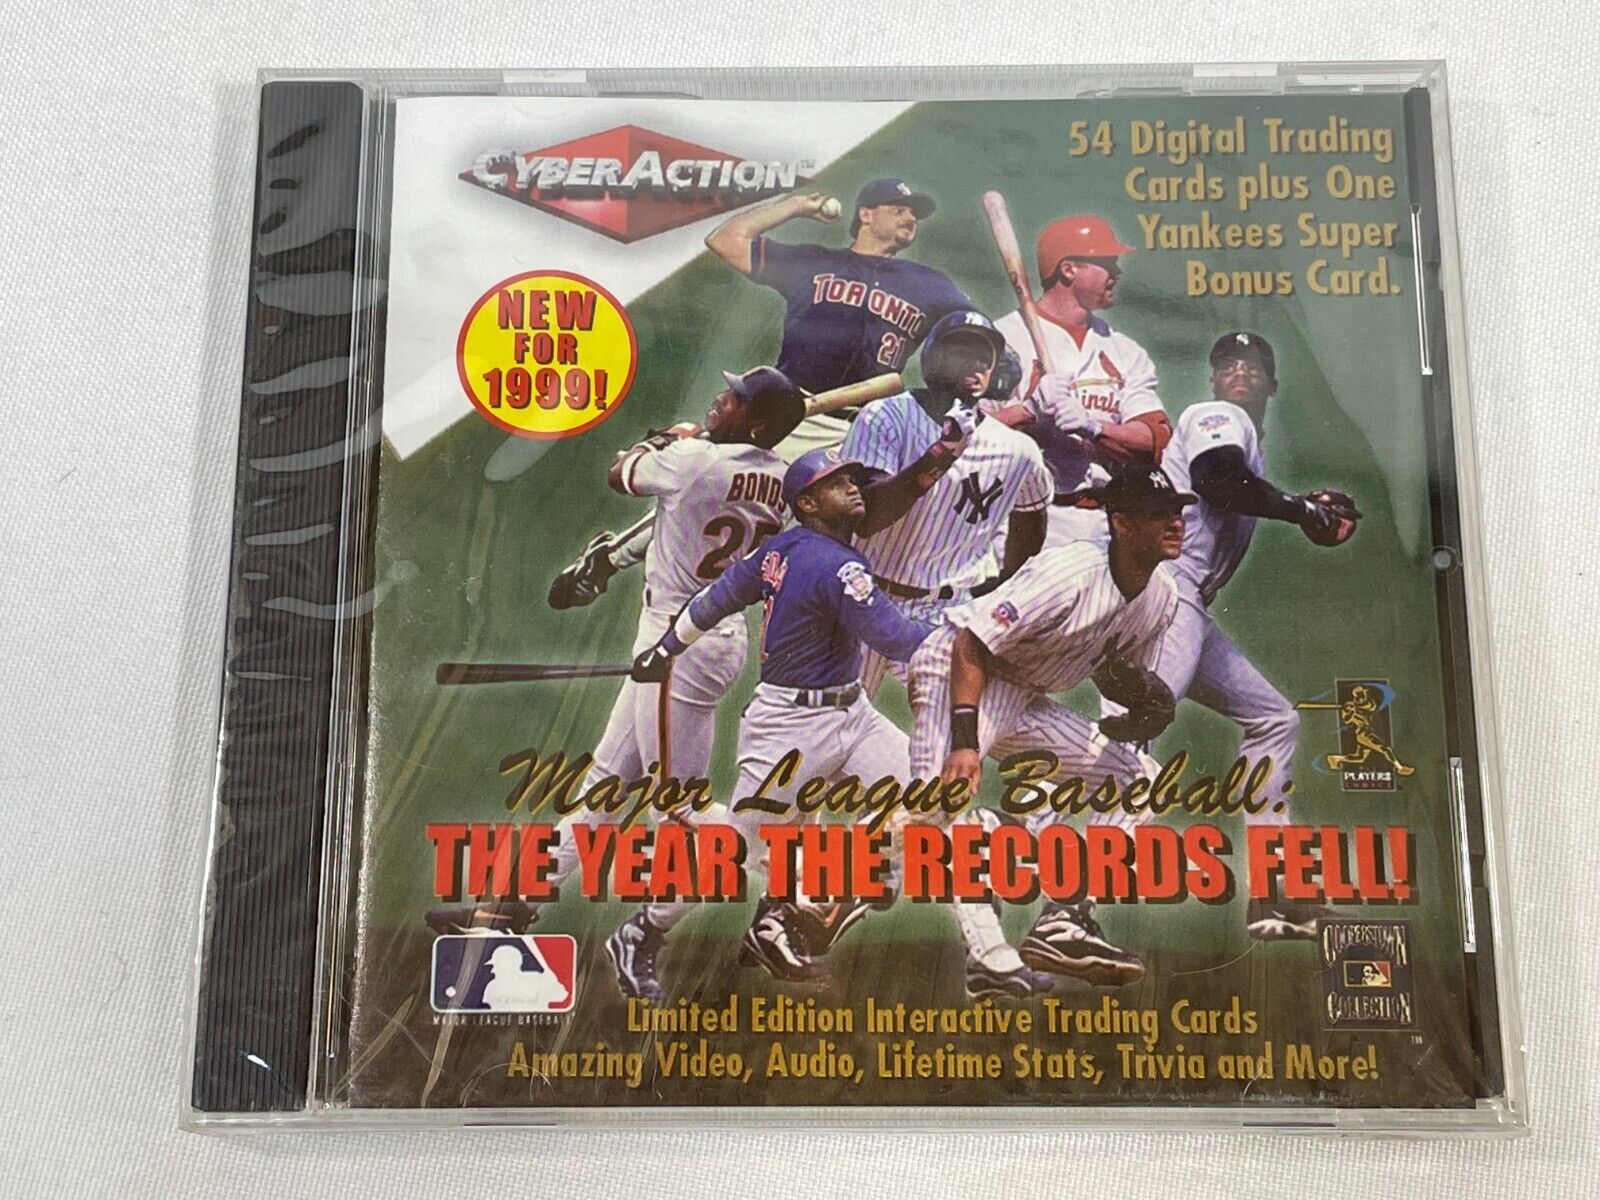 Vintage 1999 MLB: The Year the Records Fell Limited Ed Interactive Trading Cards